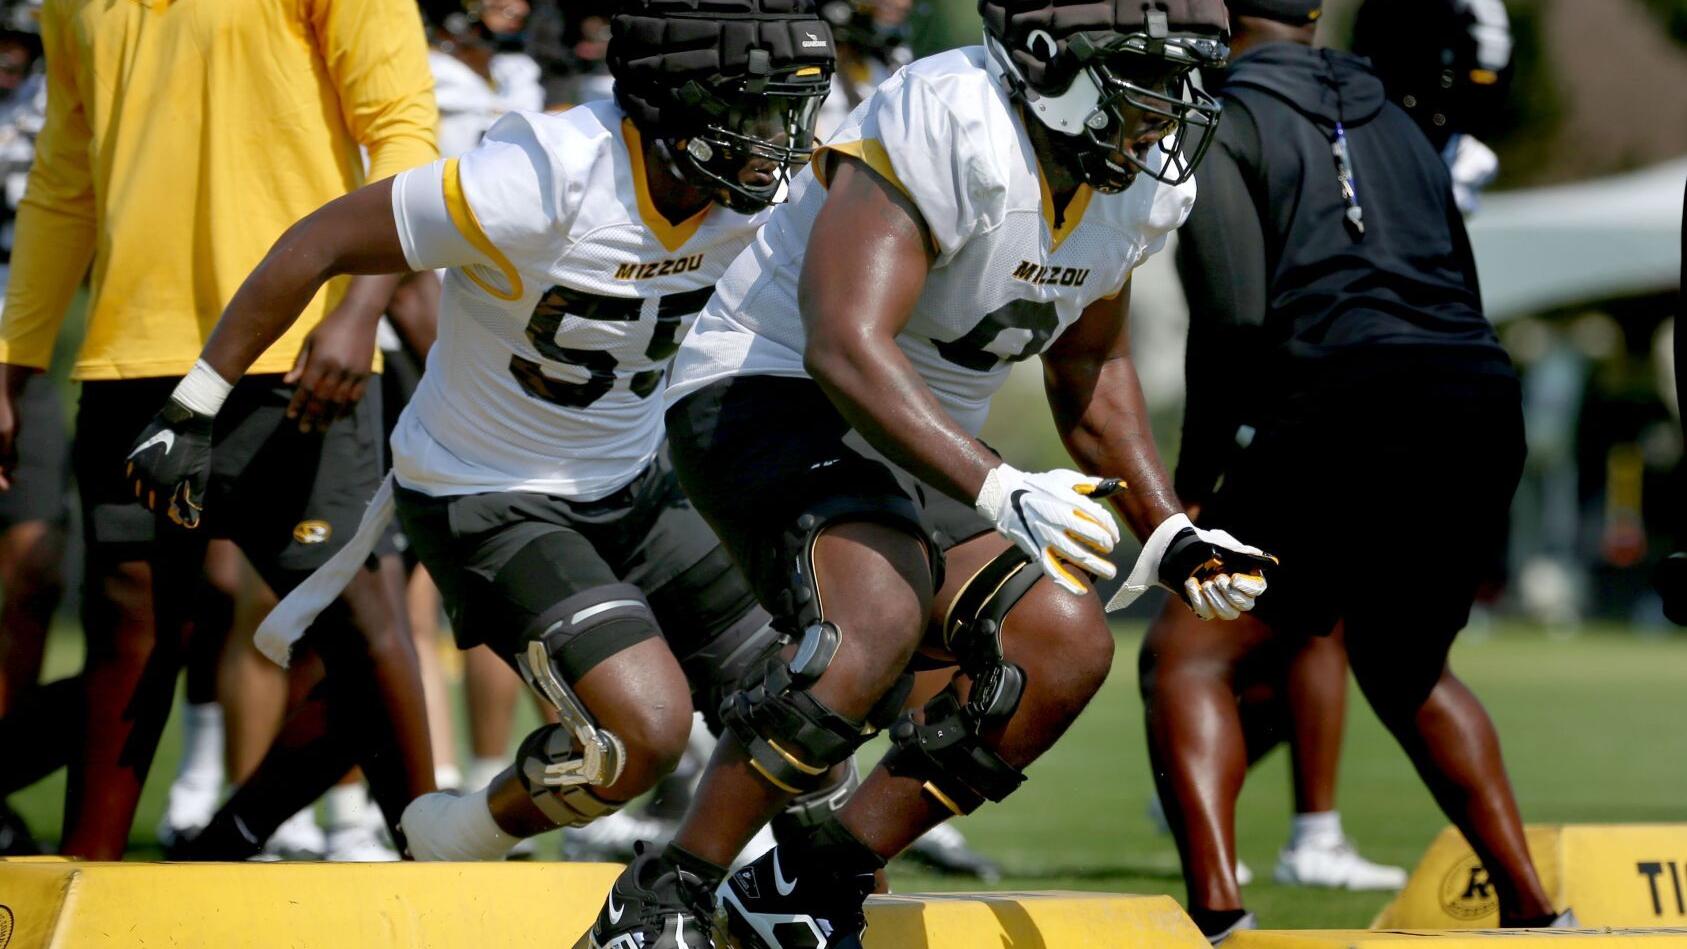 Ready-made transfers help overhaul middle of Mizzou's defensive line